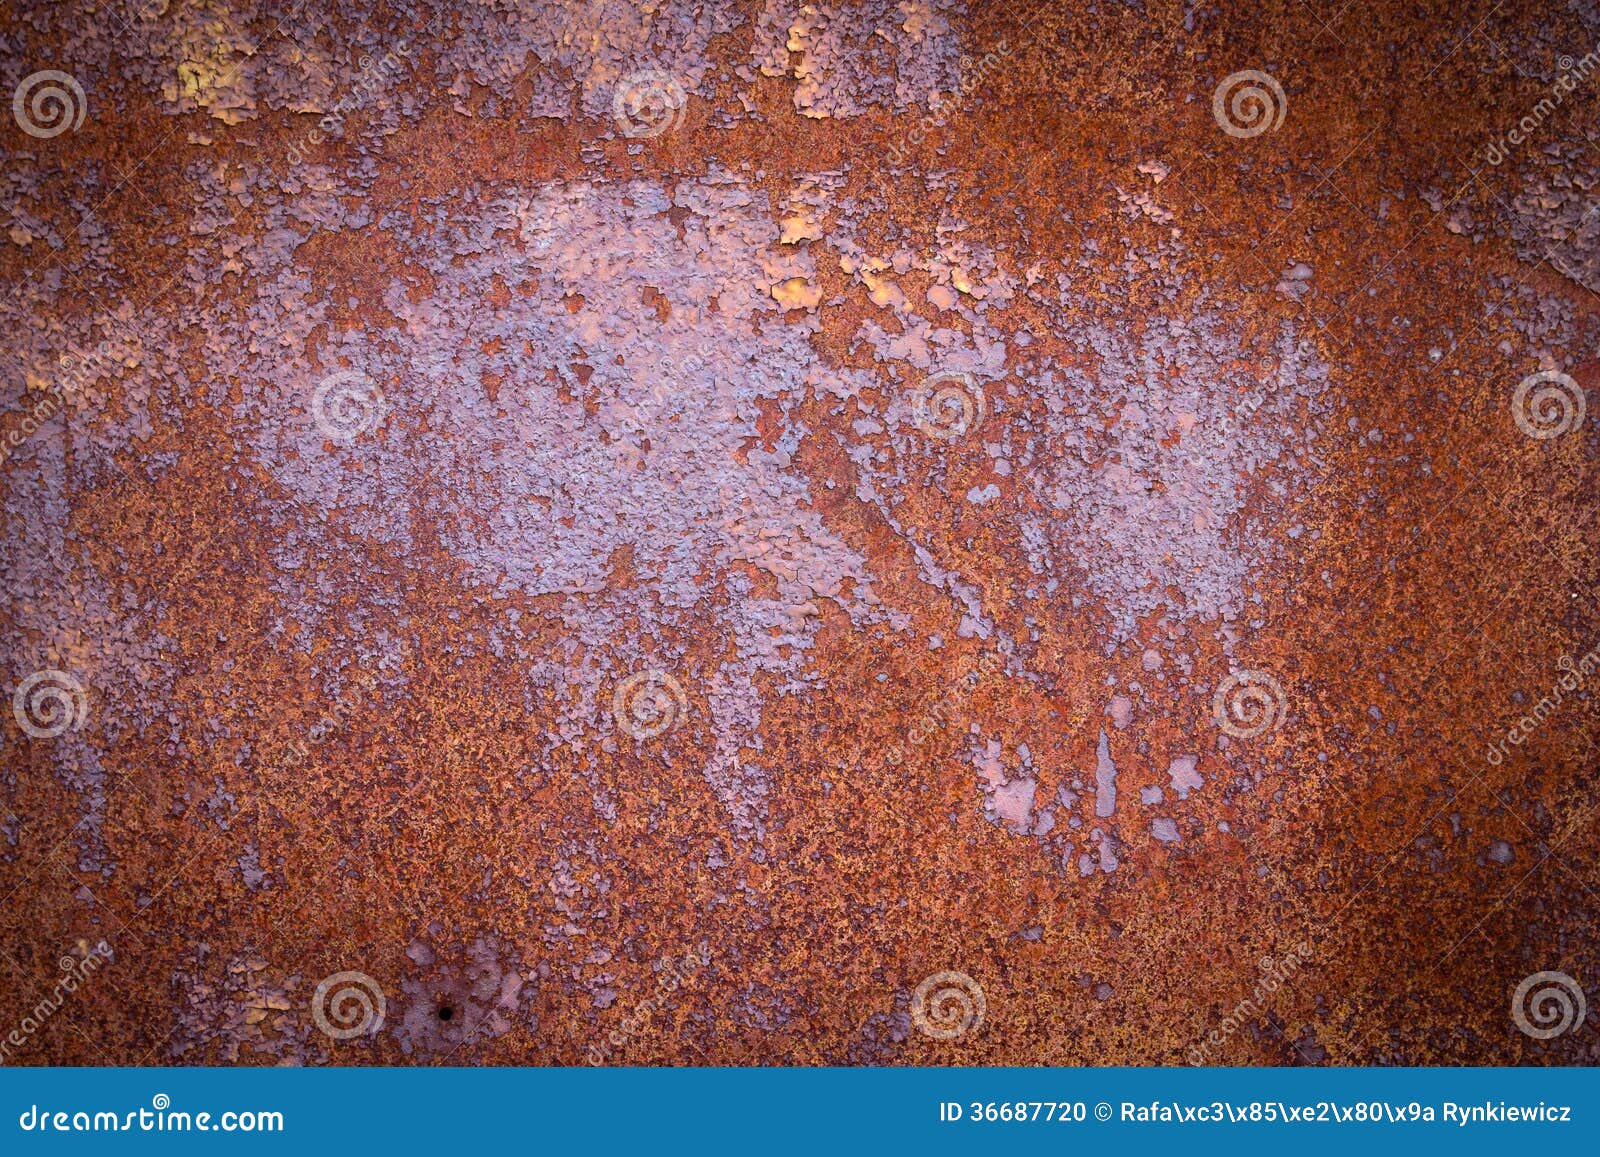 Chemicals to rust metal фото 111